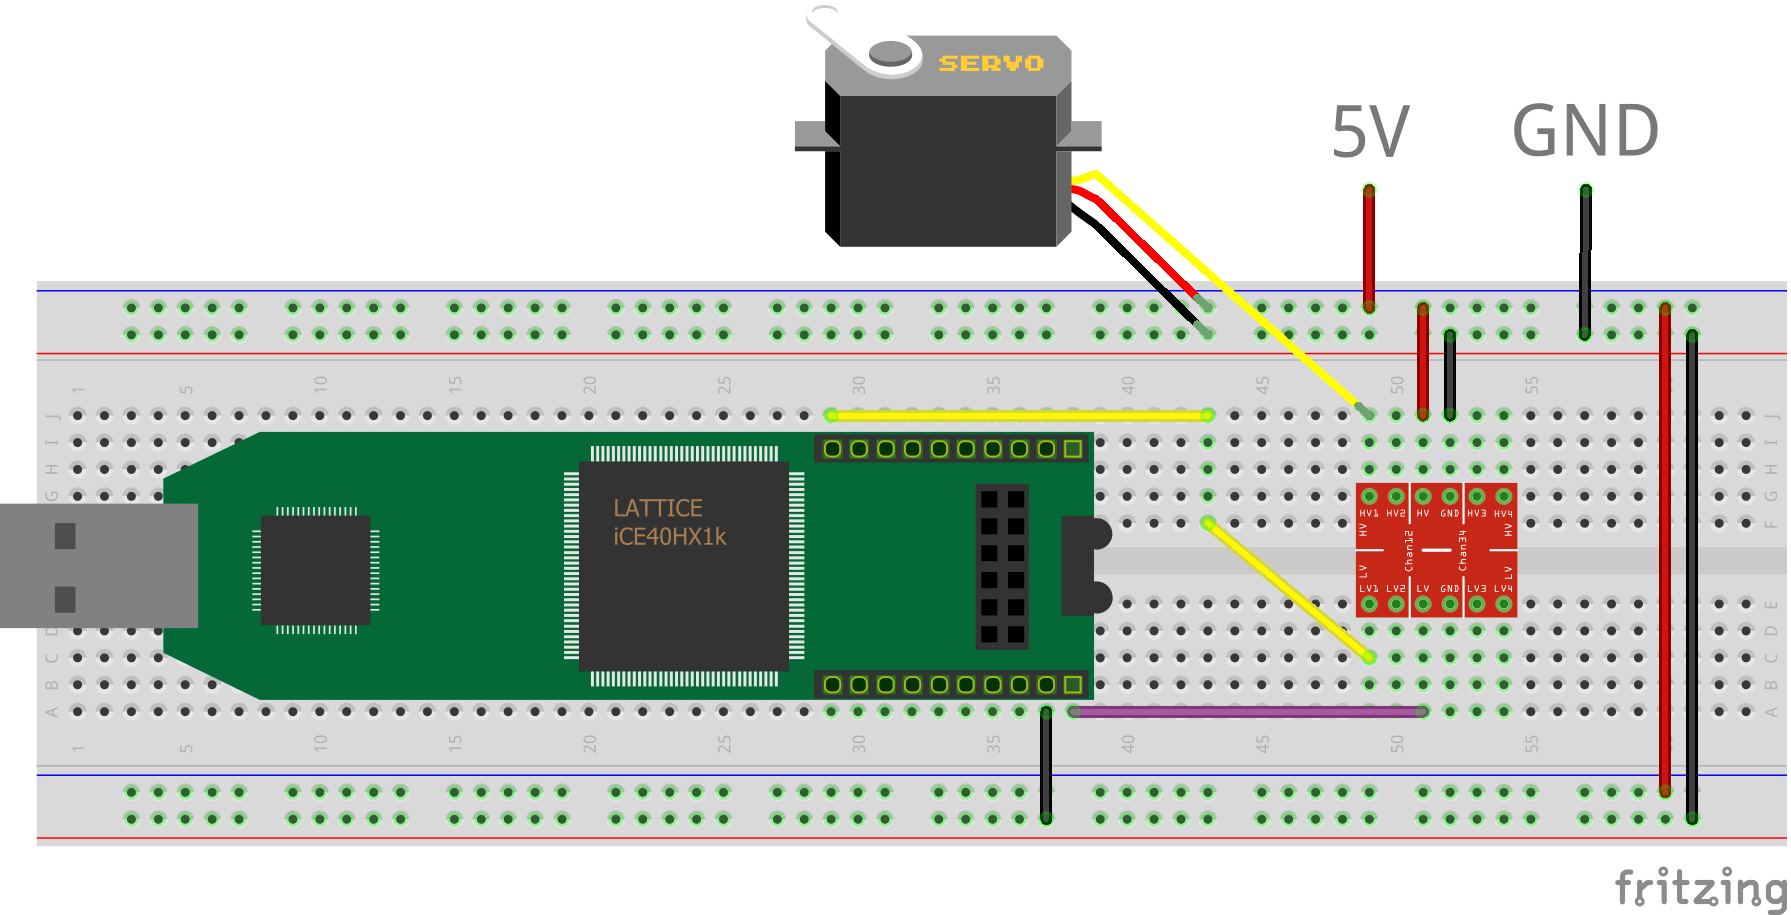 Breadboard layout of Lattice iCEstick connected to servo through a level shifter